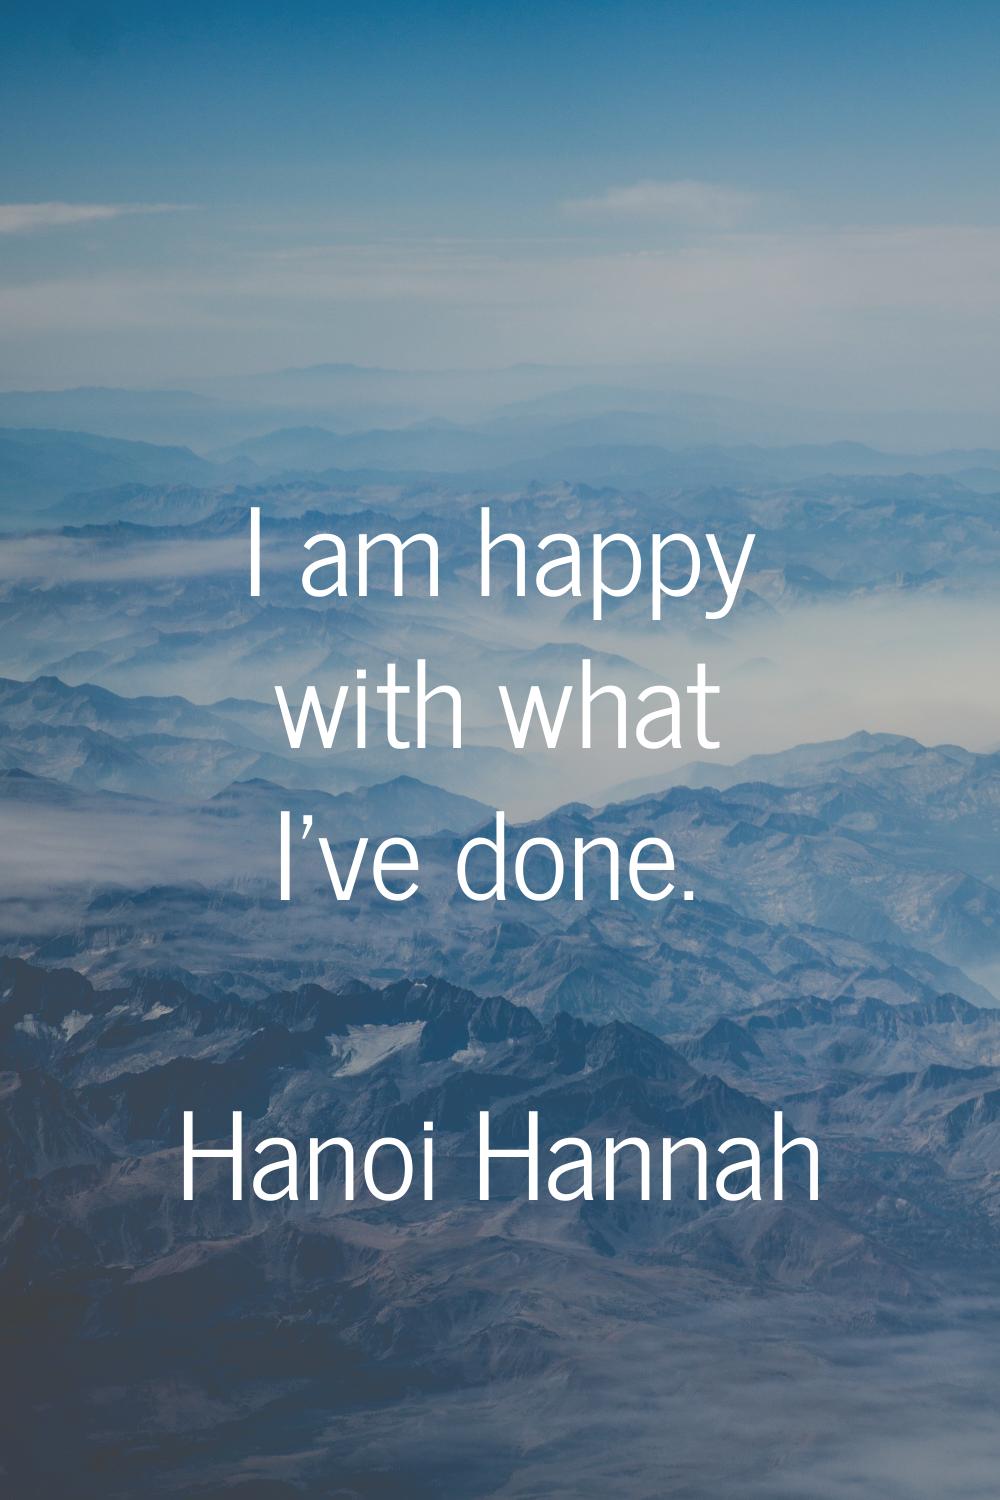 I am happy with what I've done.